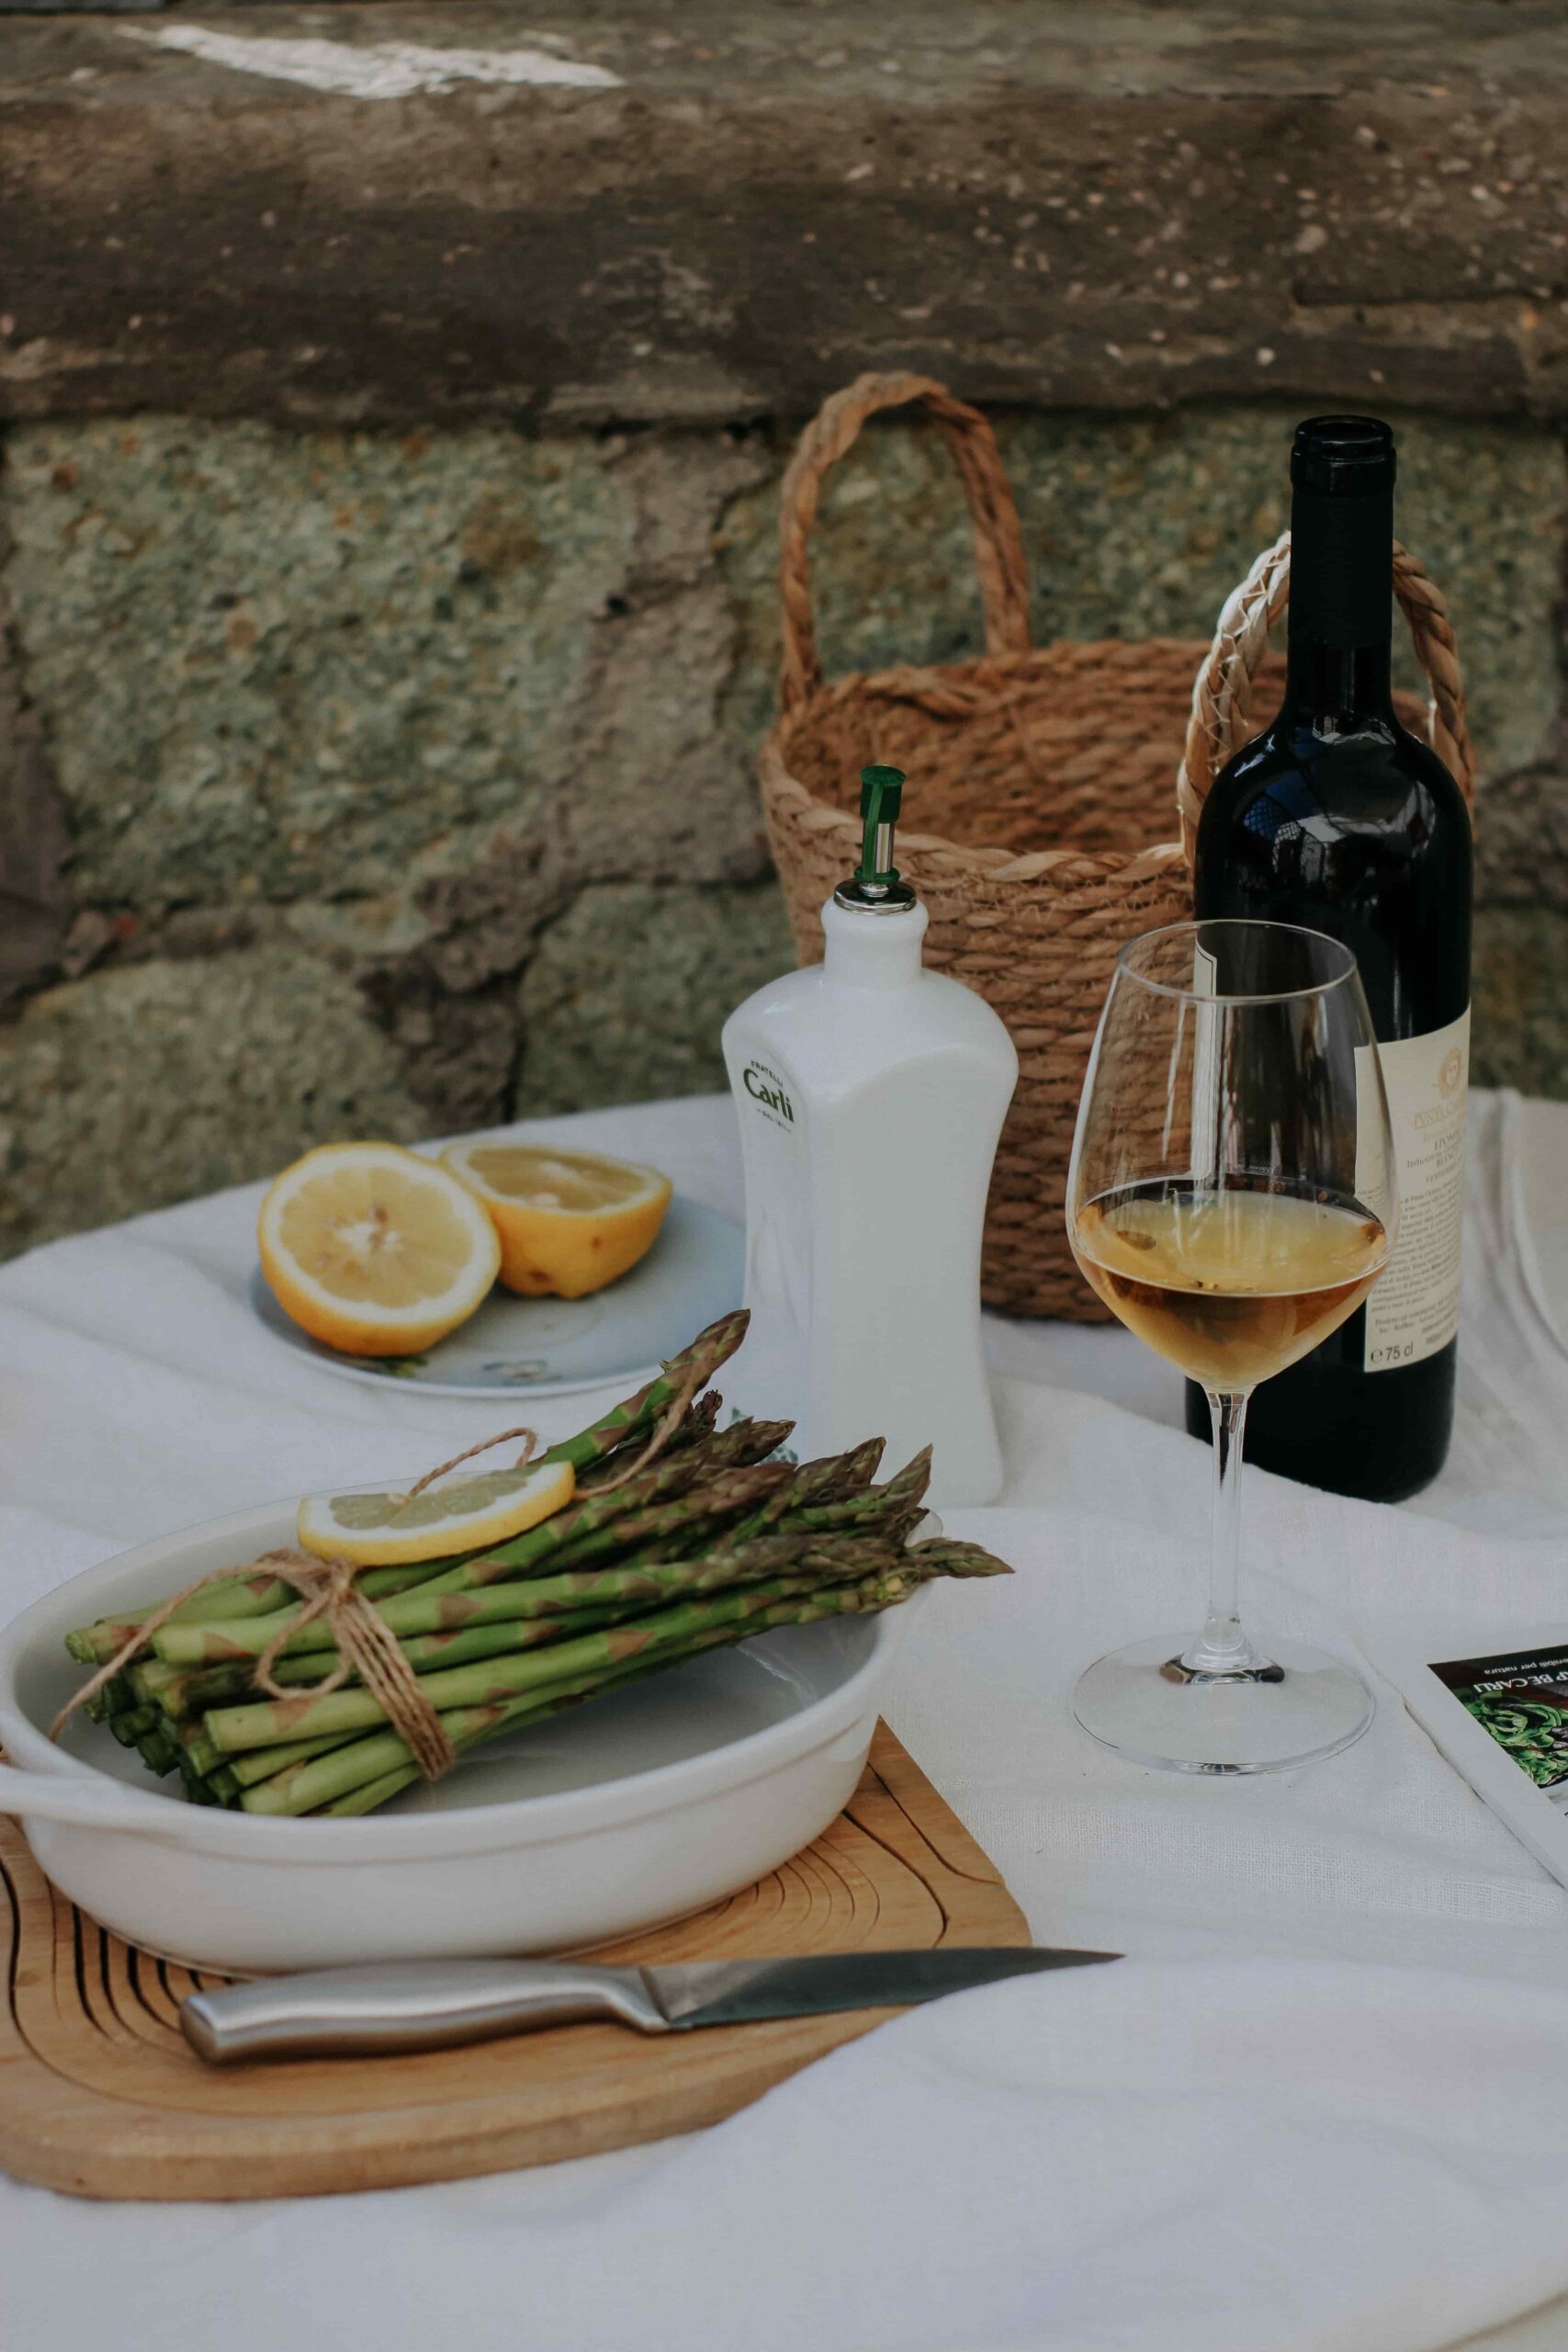 A dining table with asparagus, lemons, and orange wine on it